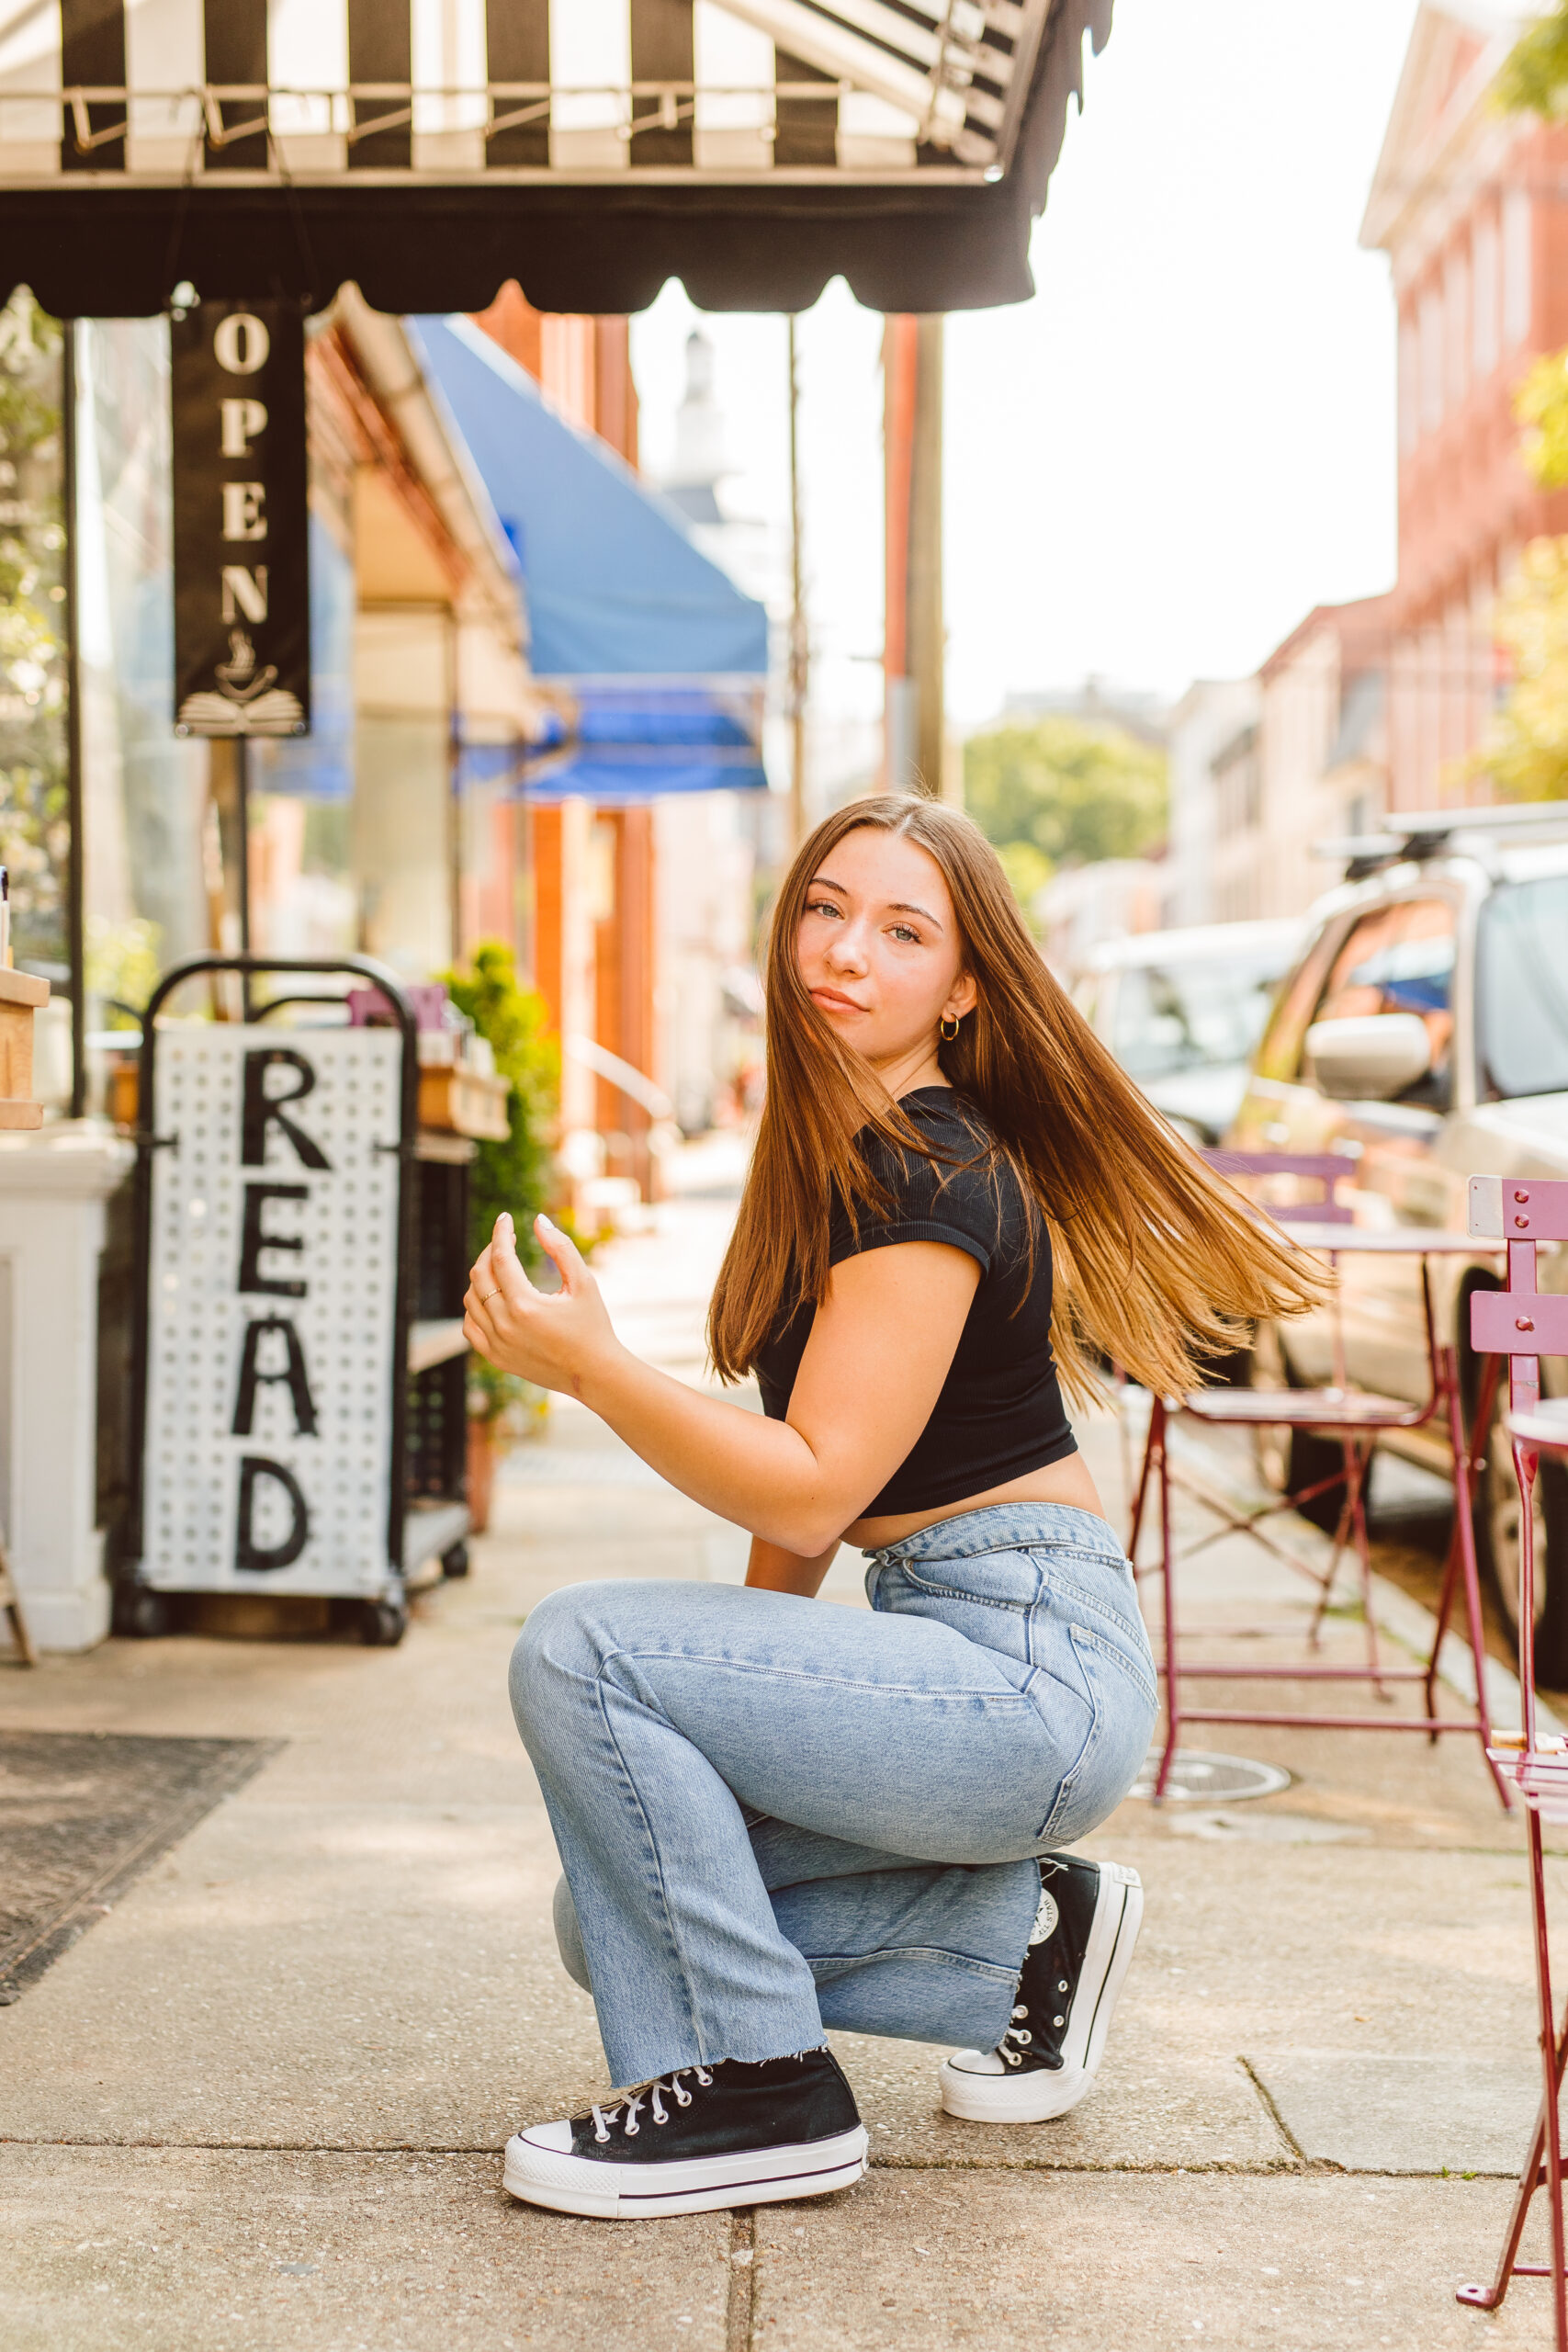 Downtown Annapolis Maryland senior portraits at Old Fox Books captured by Brooke Michelle - Annapolis Photographer.